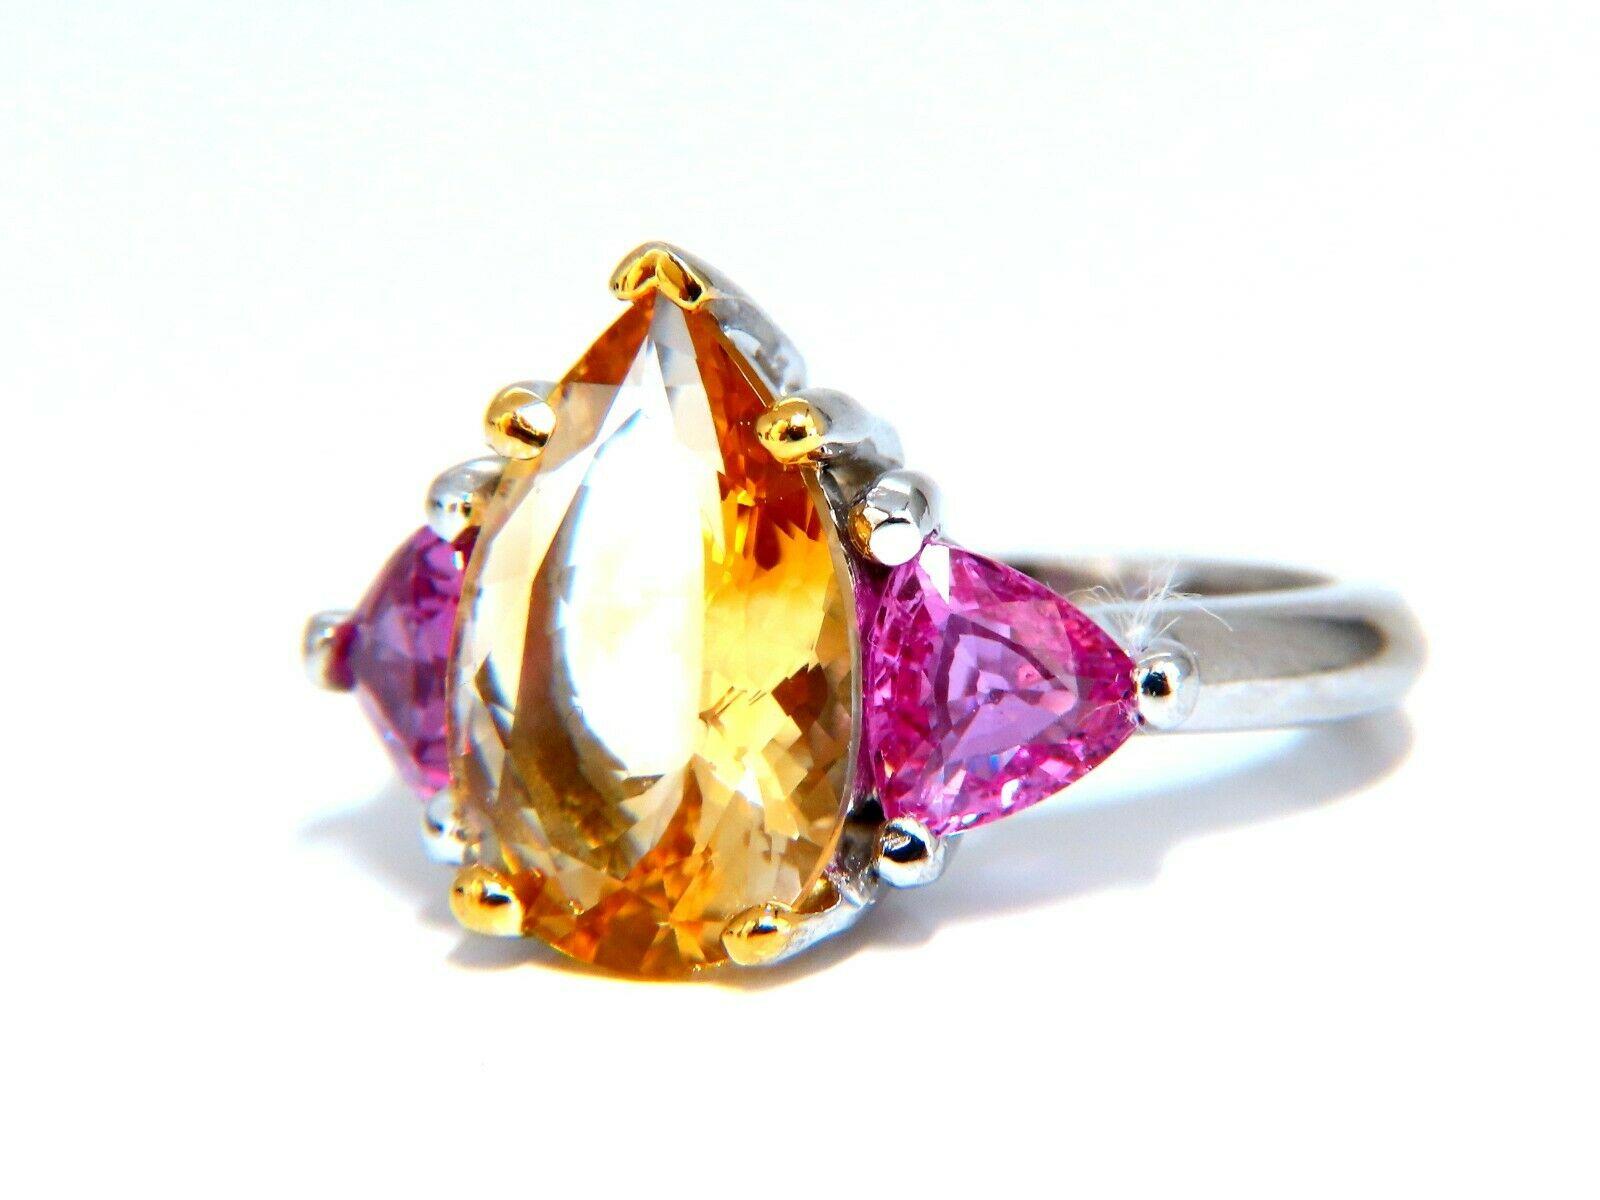 5.11ct. Natural Golden Citrine  ring.

Pear cut, Excellent VS Clean Clarity

Brilliant Vivid Bright Yellow golden color

14.5mm X 10mm

2.12ct Natural Trilliant Pink Sapphires

5.5 x 6mm each

Platinum

14 grams.

Depth of ring: 8.5mm

current ring